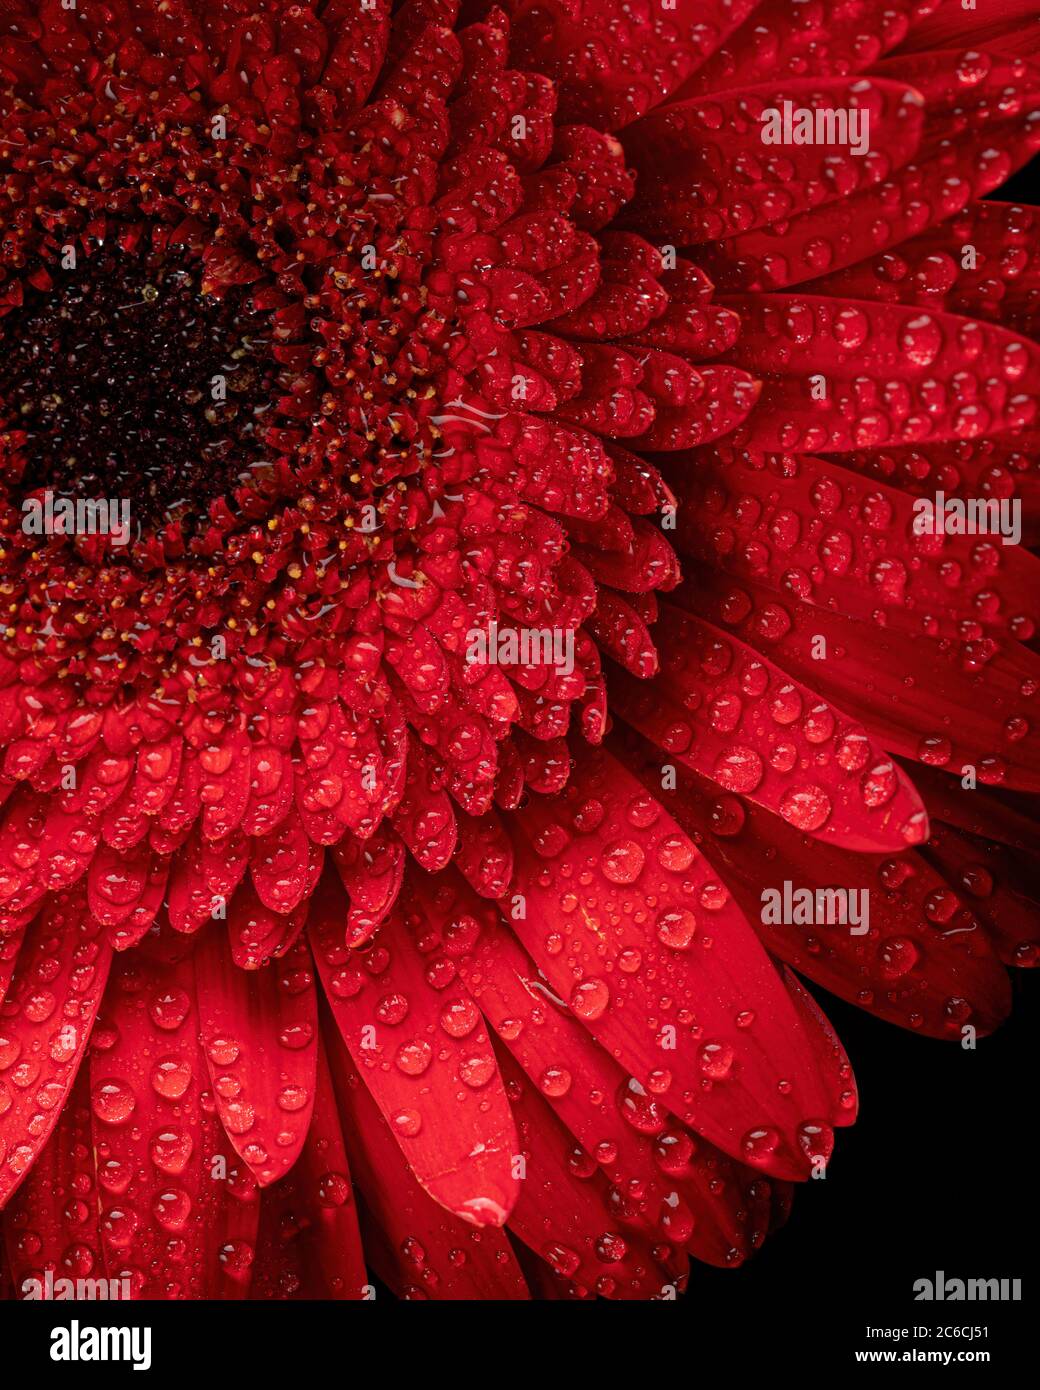 Flower with Droplets Stock Photo